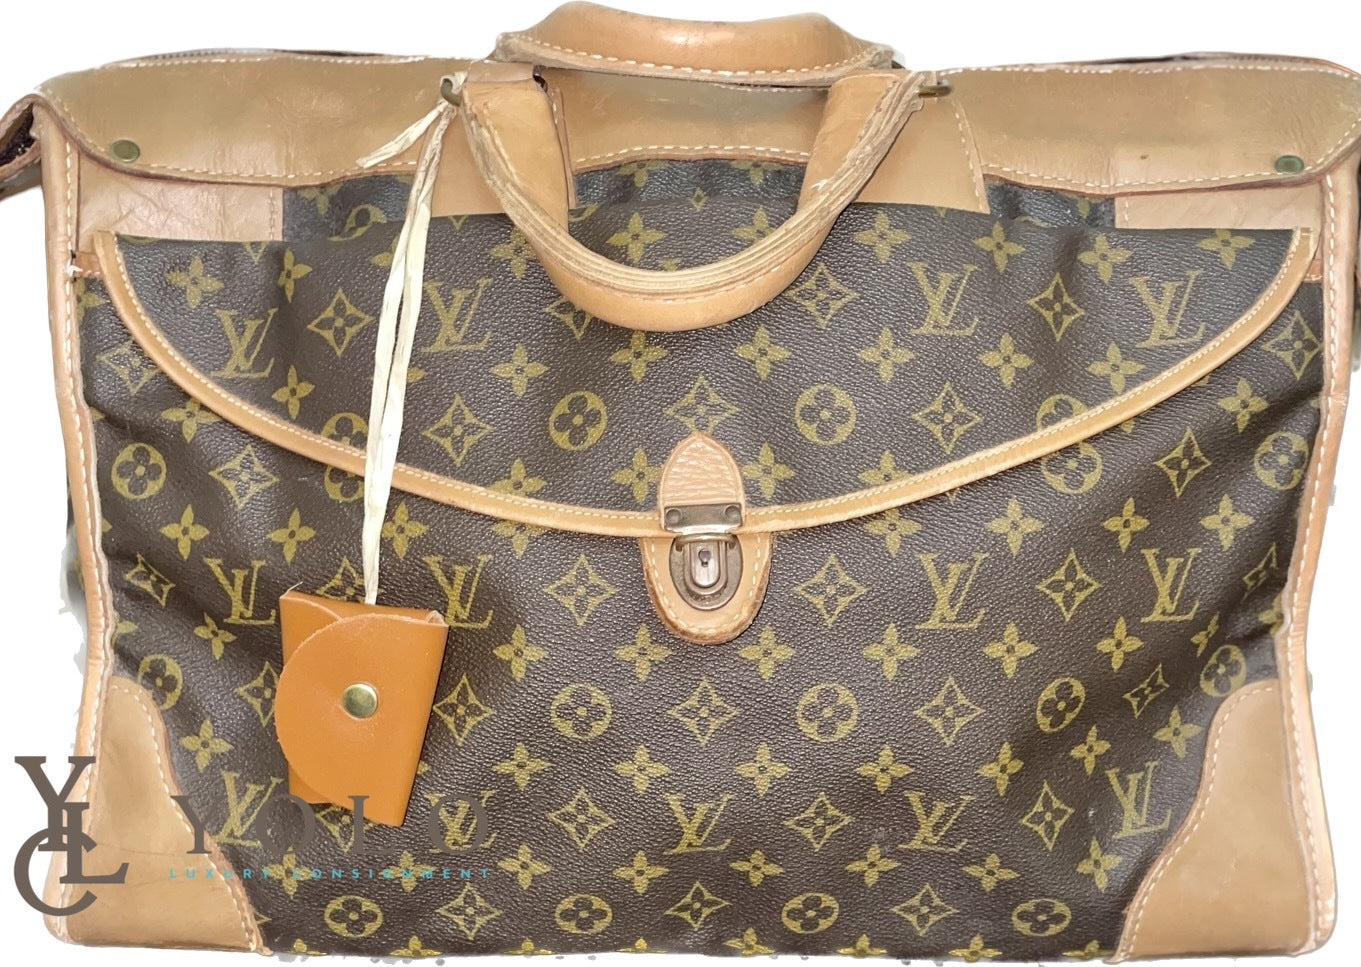 Louis Vuitton Rare Vintage Saks Fifth Avenue French Company Tote